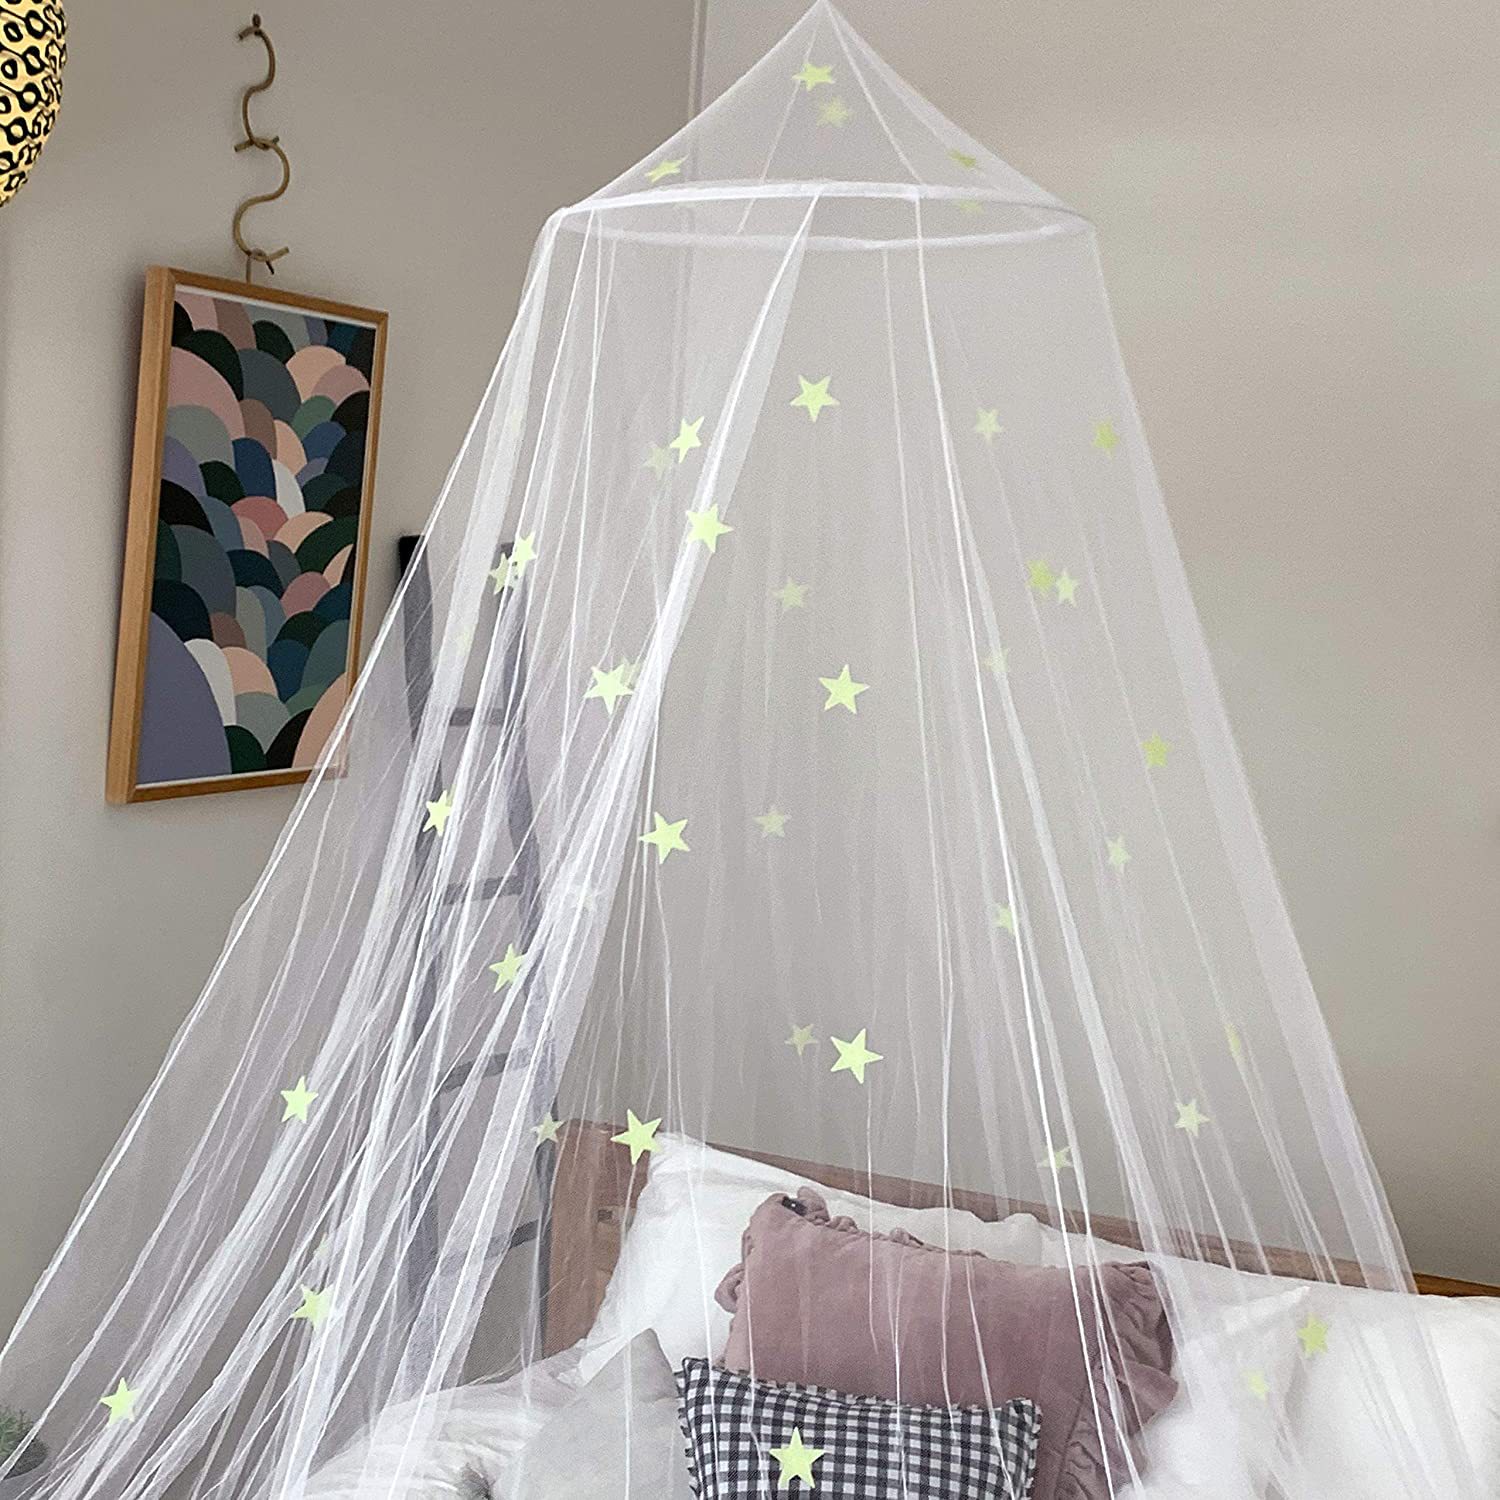 Children's Hanging Bedspread Suitable for Boys and Girls Bed in the Dark Star Luminous Night Star Pattern Suitable for Full Size Bed